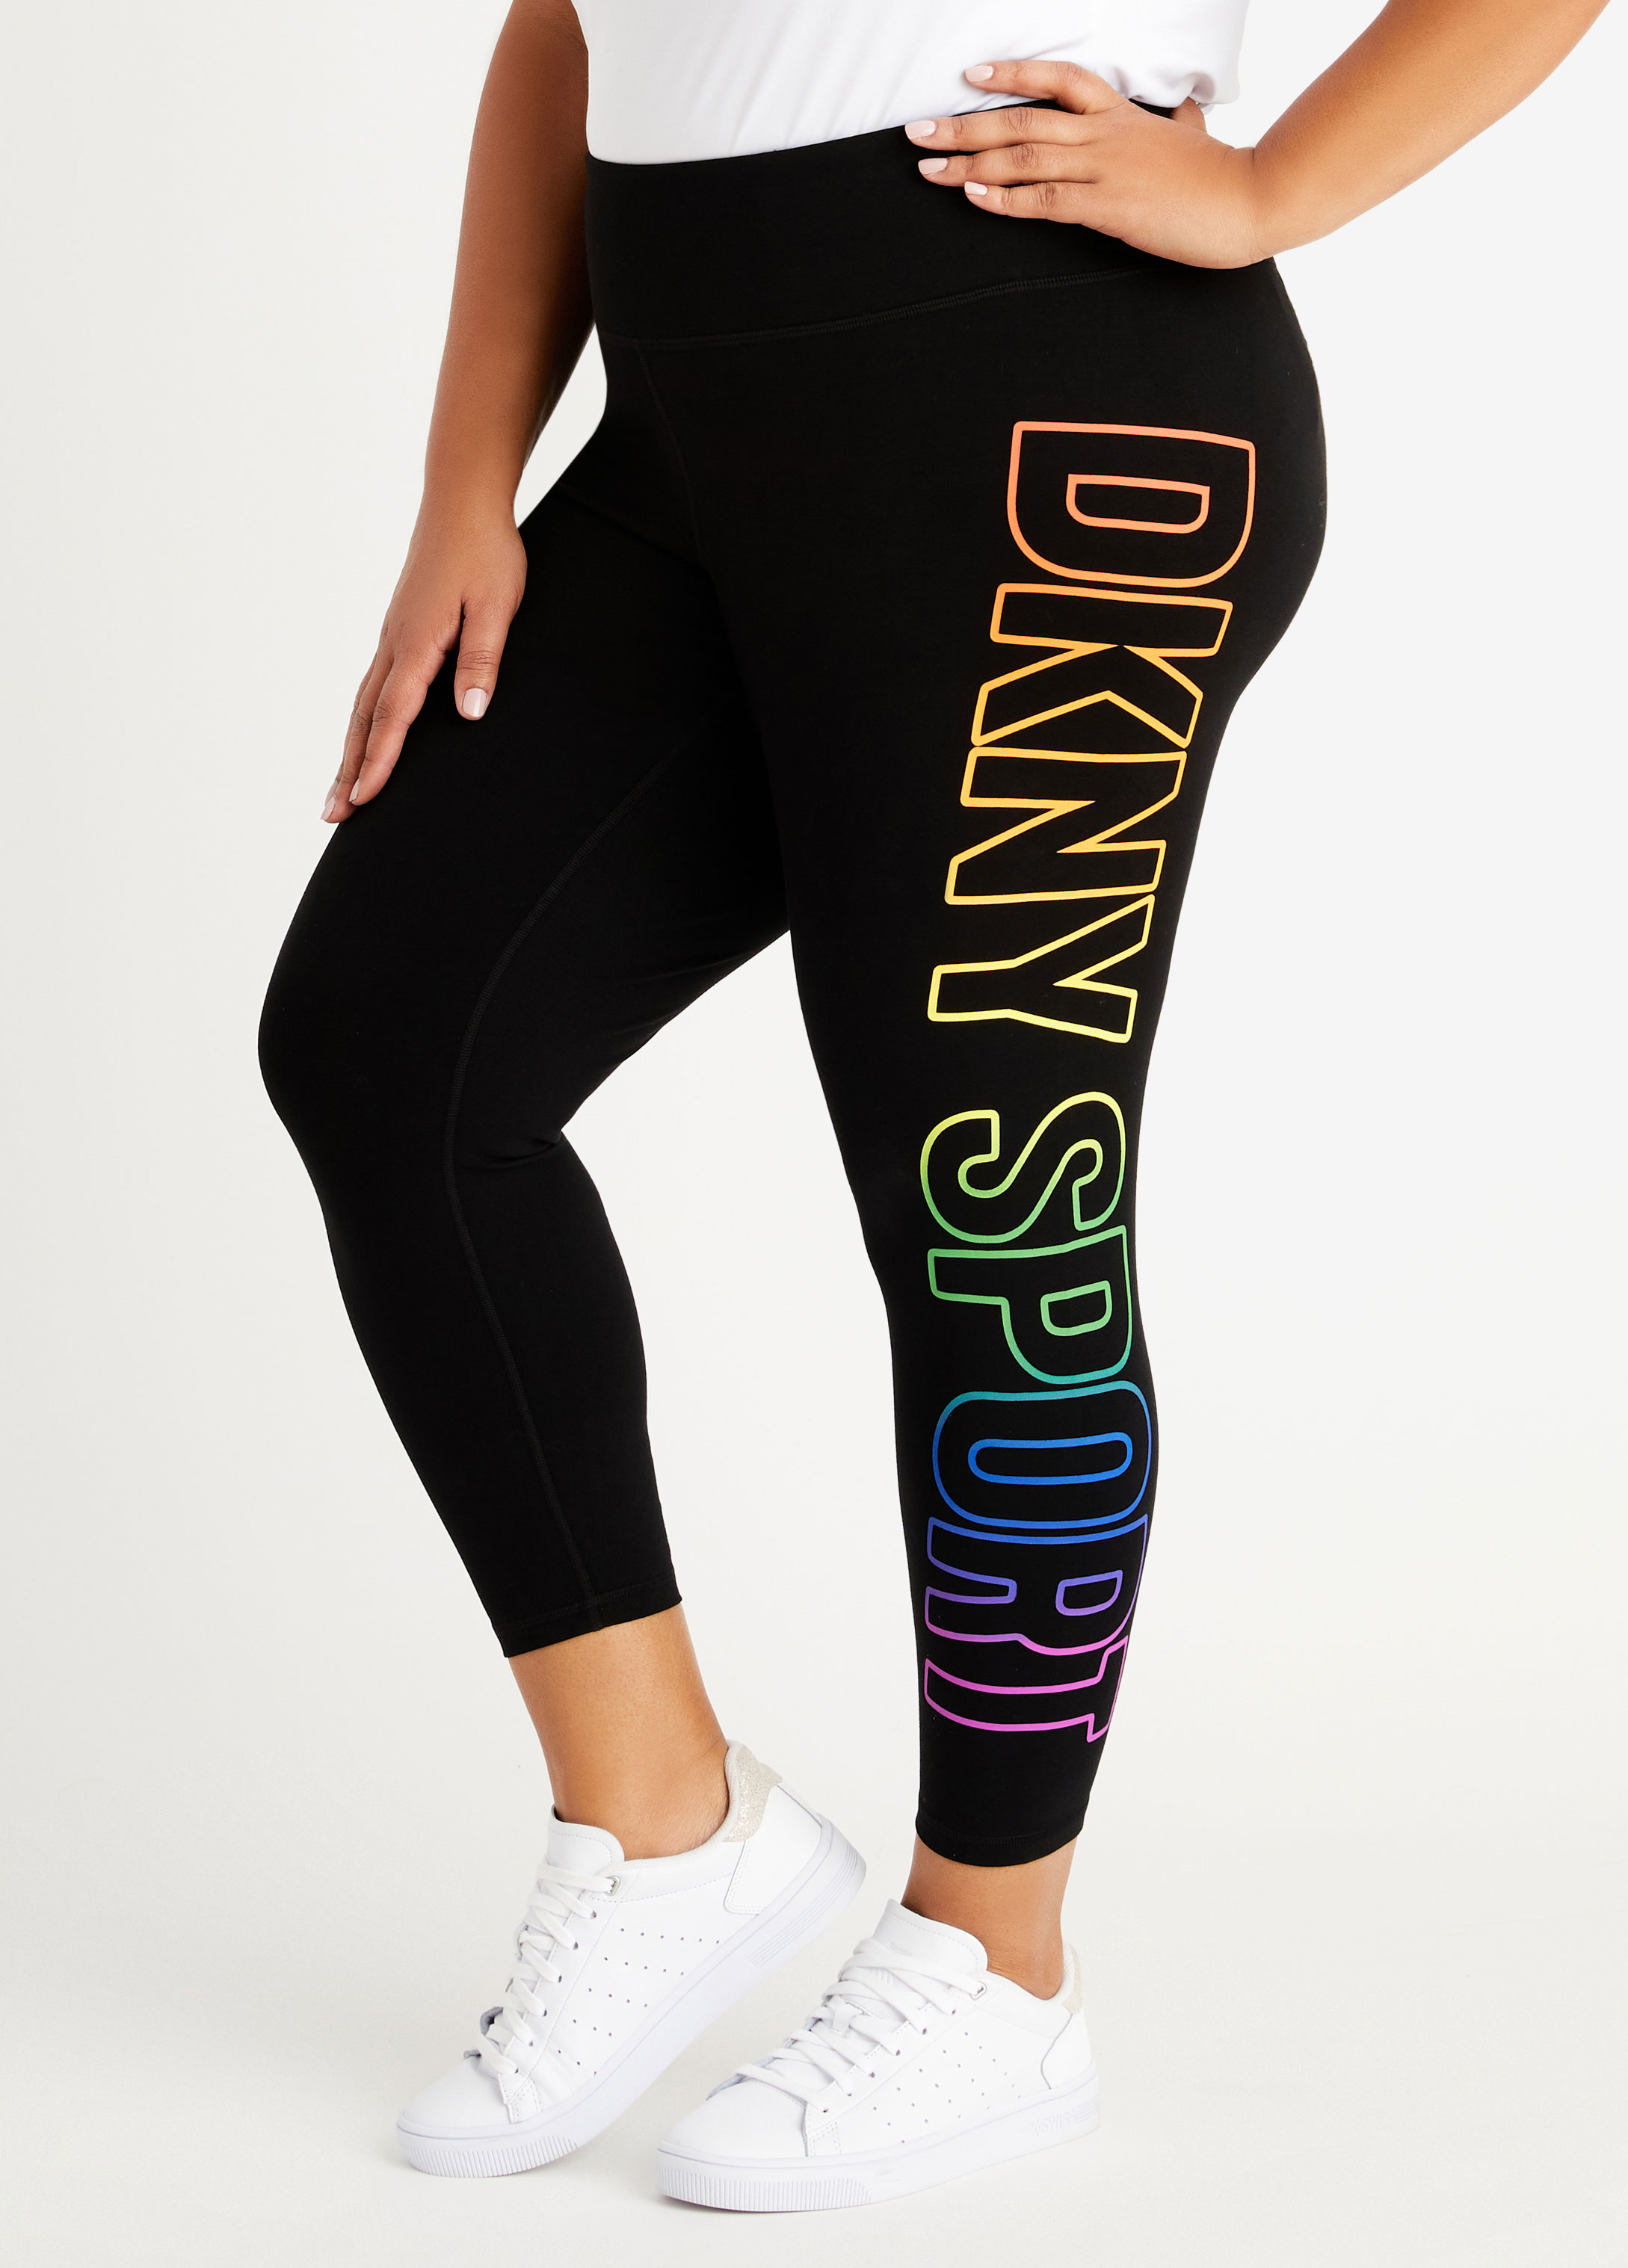 DKNY Active Sports Leggings from USA Brand New with Tags/bag Size